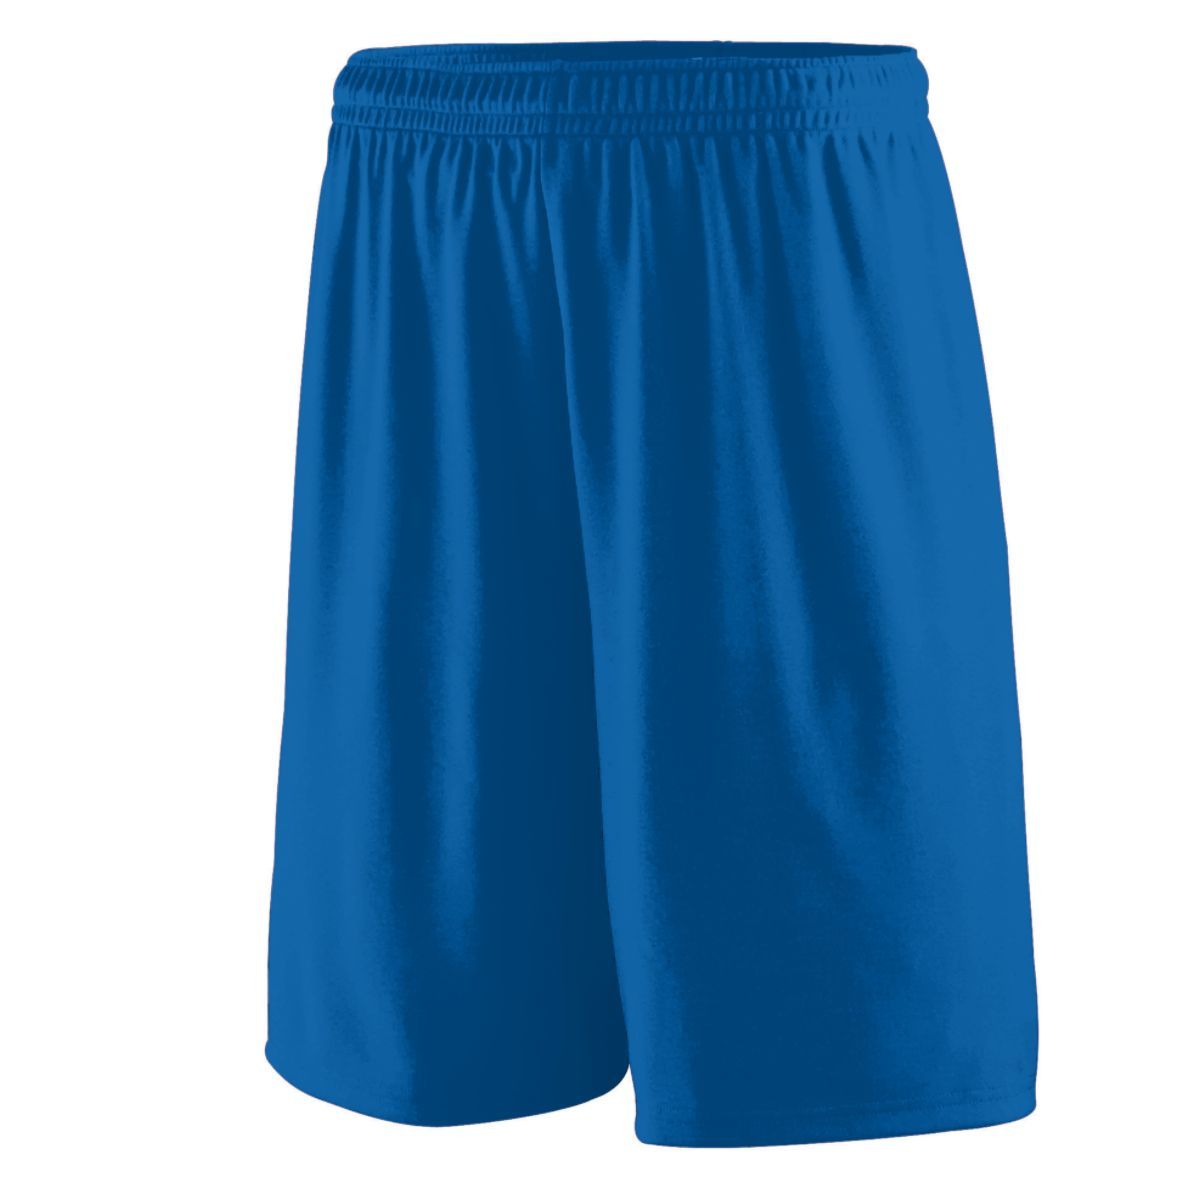 Augusta Sportswear Training Shorts in Royal  -Part of the Adult, Adult-Shorts, Augusta-Products product lines at KanaleyCreations.com